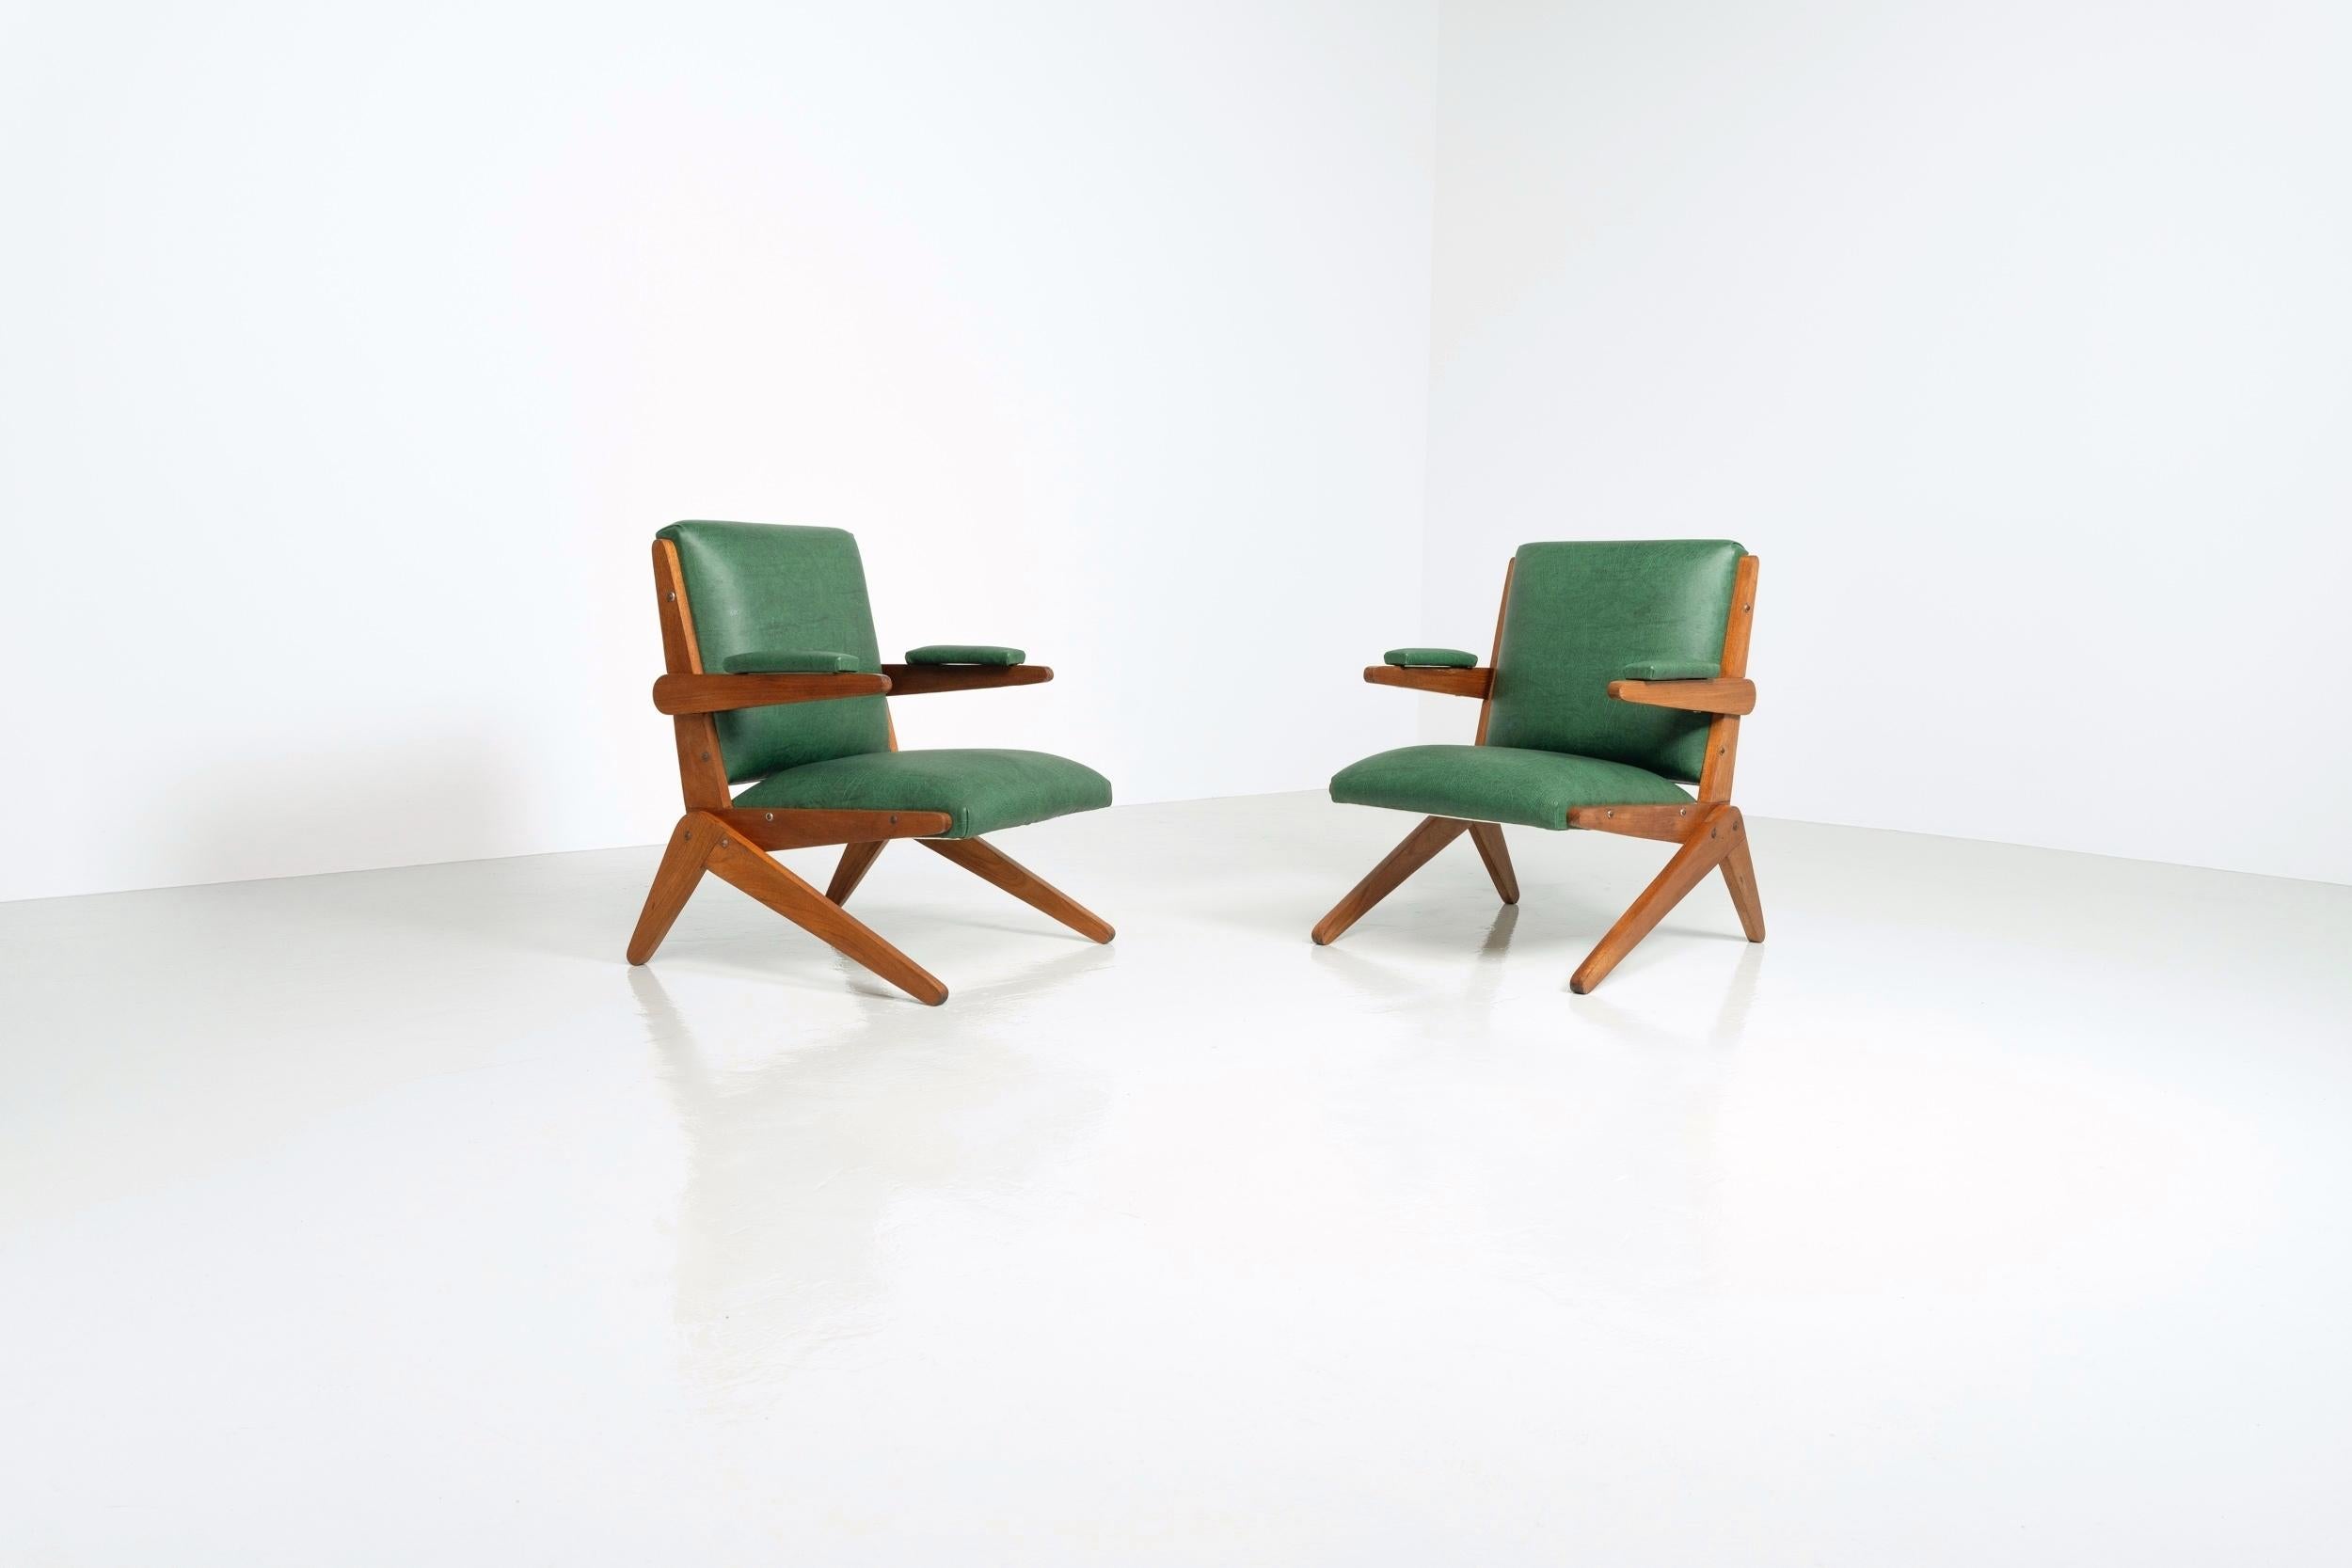 Super rare and beautiful, fully original 'scissors' lounge chairs designed by Lina Bo Bardi and manufactured by Studio D'Arte Palma, Brazil 1948. These chairs have stunning solid teak wooden structures and original old green leatherette upholstery.